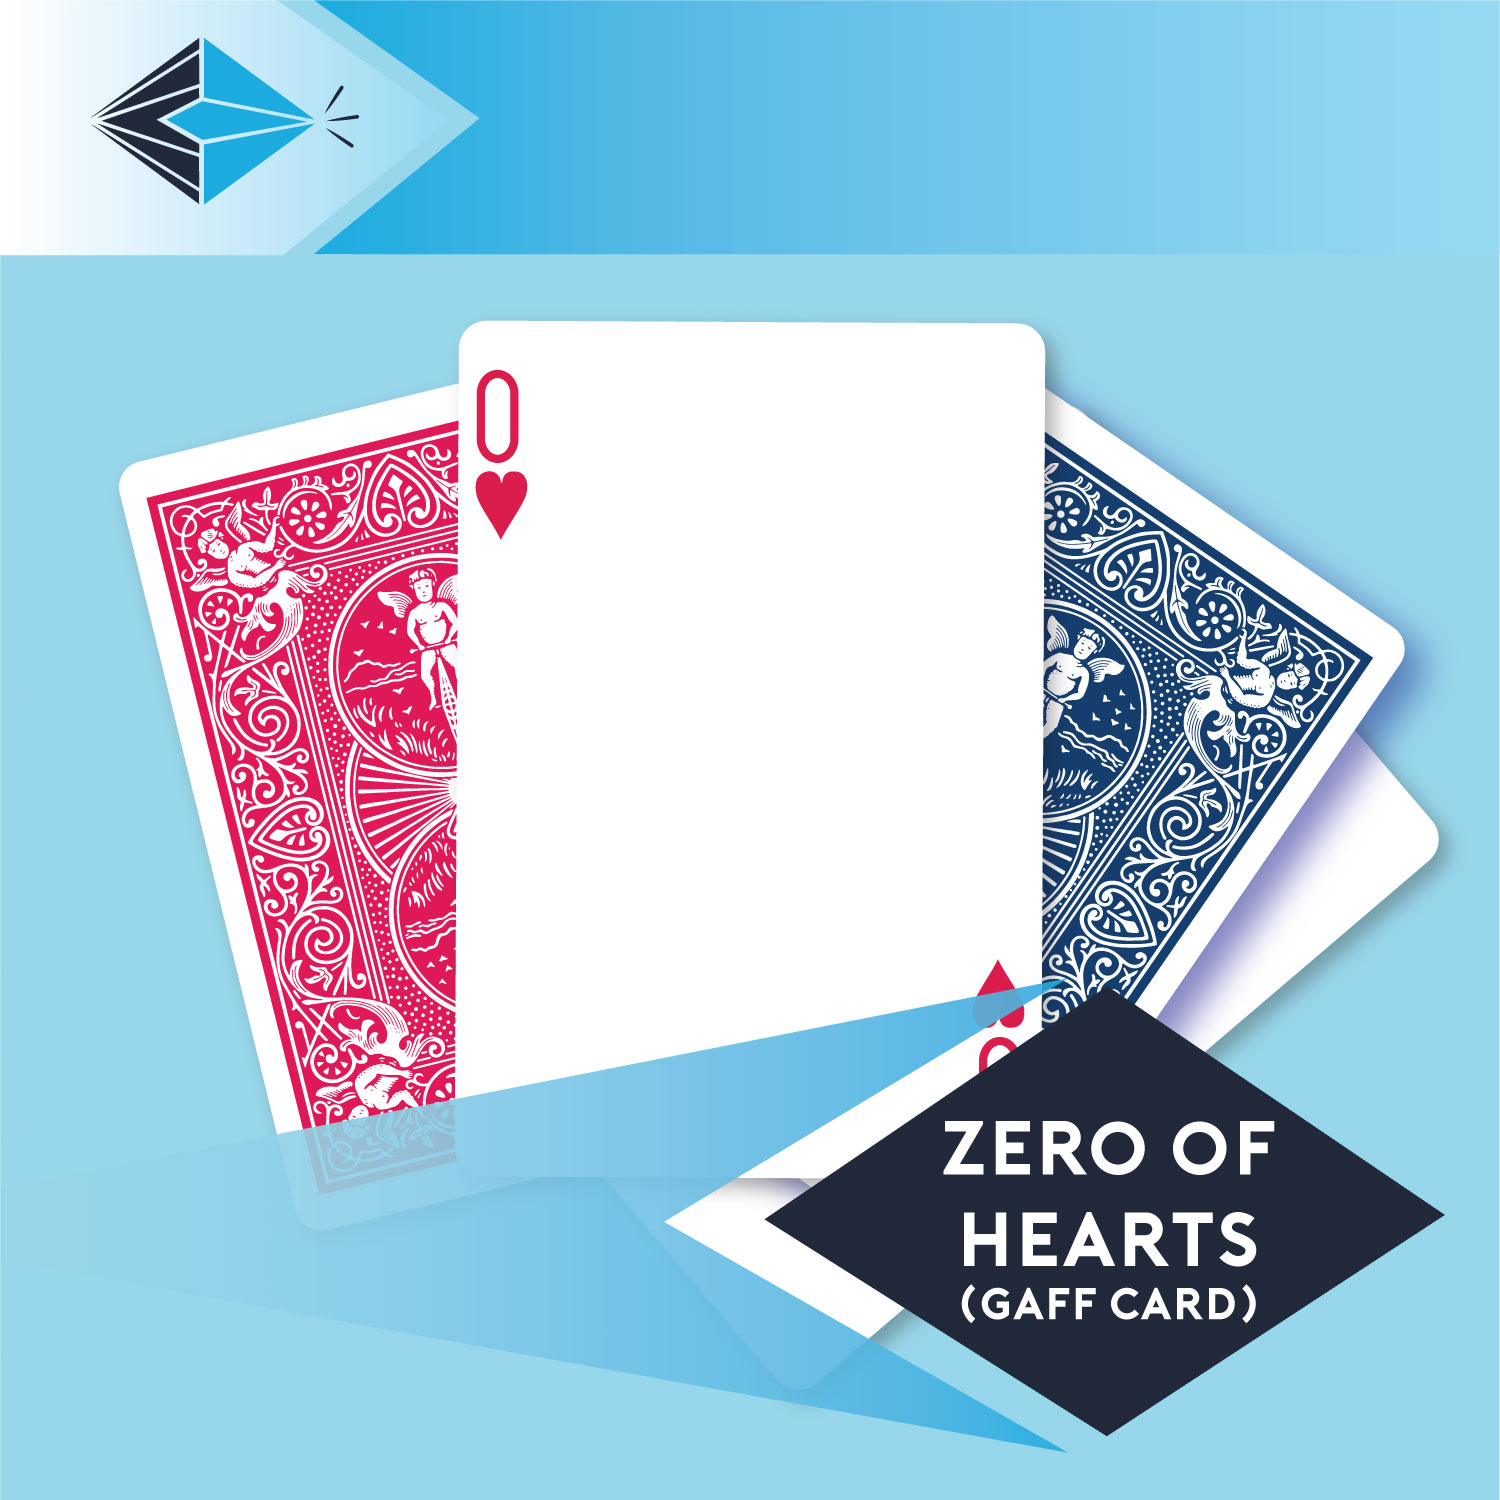 zero of hearts gaff card 21 playing card for magicians printing printers Stockport Manchester UK